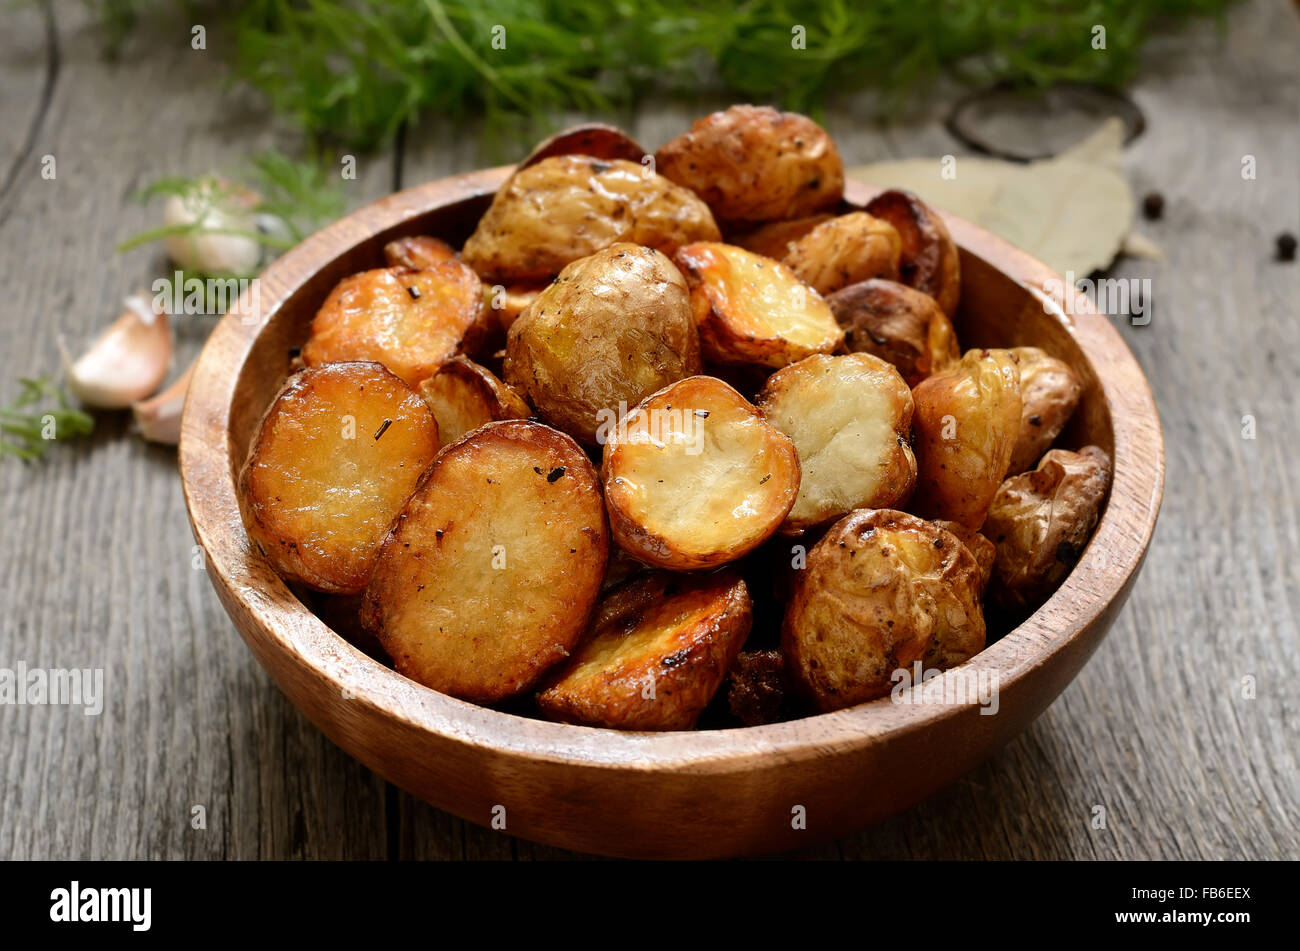 Roasted potato in wooden bowl Stock Photo